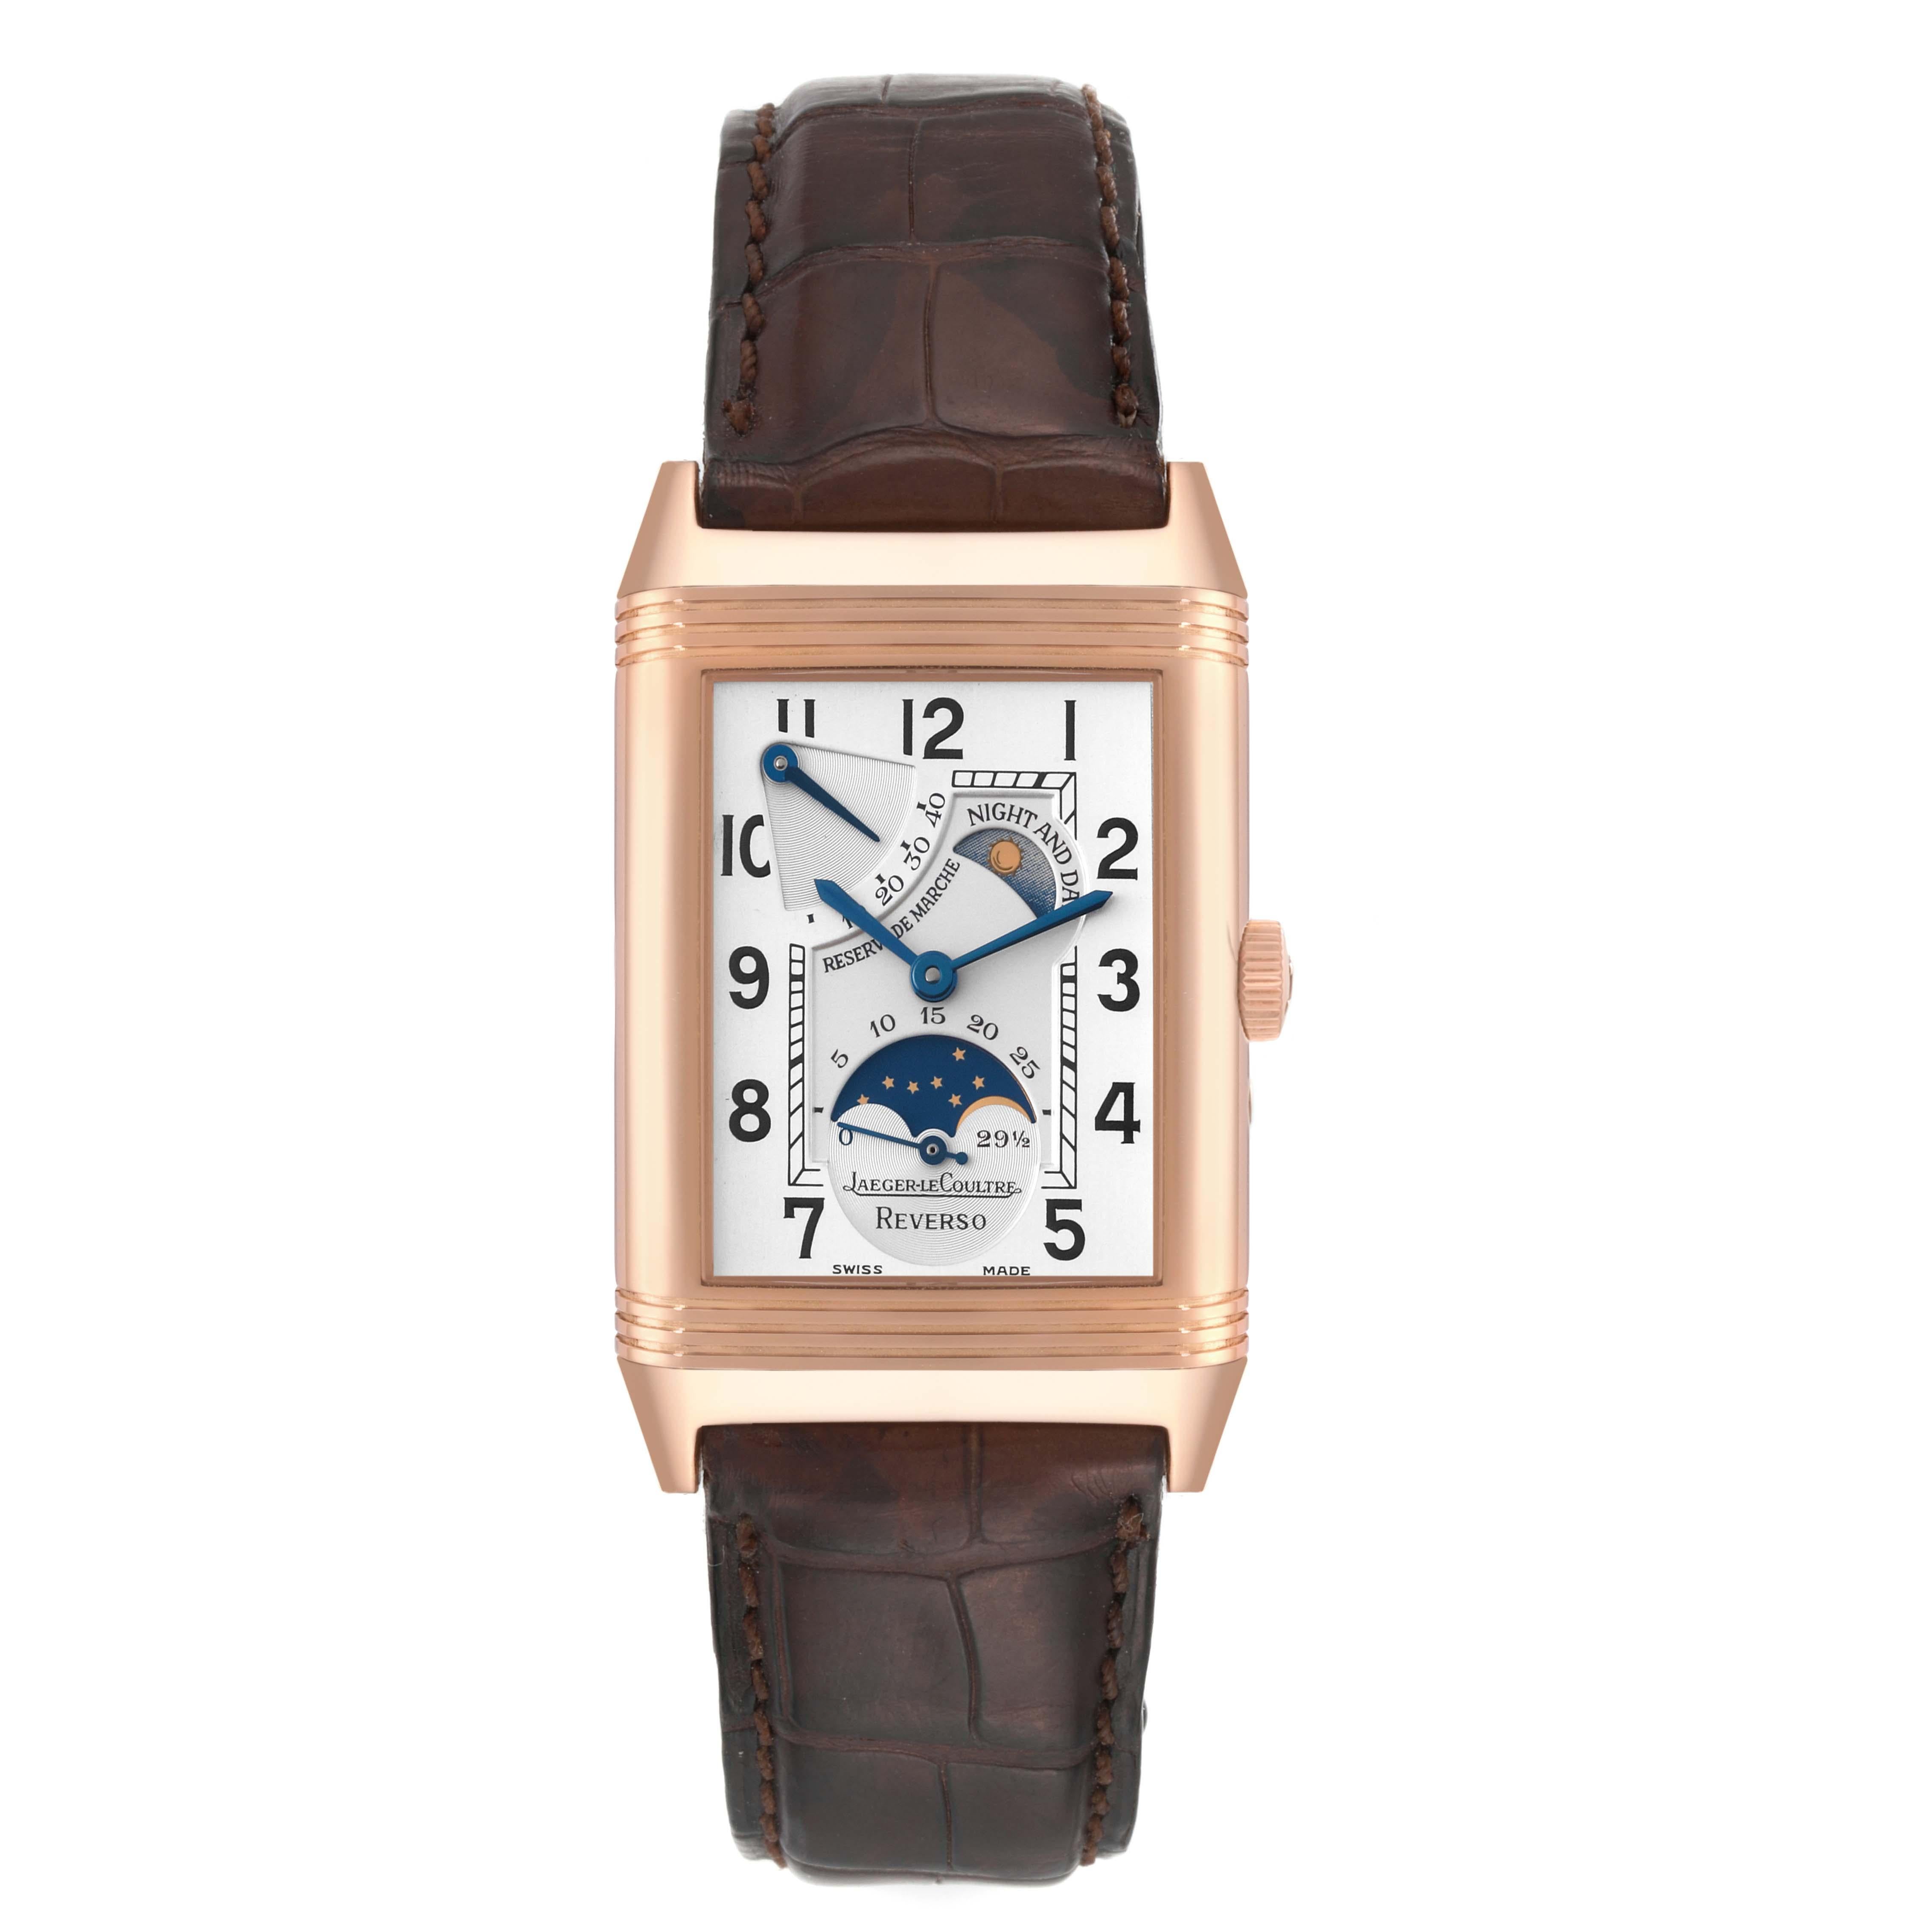 Jaeger LeCoultre Reverso Sun Moon Rose Gold Mens Watch 270.2.63 Box Papers. Manual winding movement. 18K rose gold 42.2 x 26.1 mm case rectangular rotating case. Exhibition case back. 18K rose gold ribbed bezel. Scratch resistant sapphire crystal.